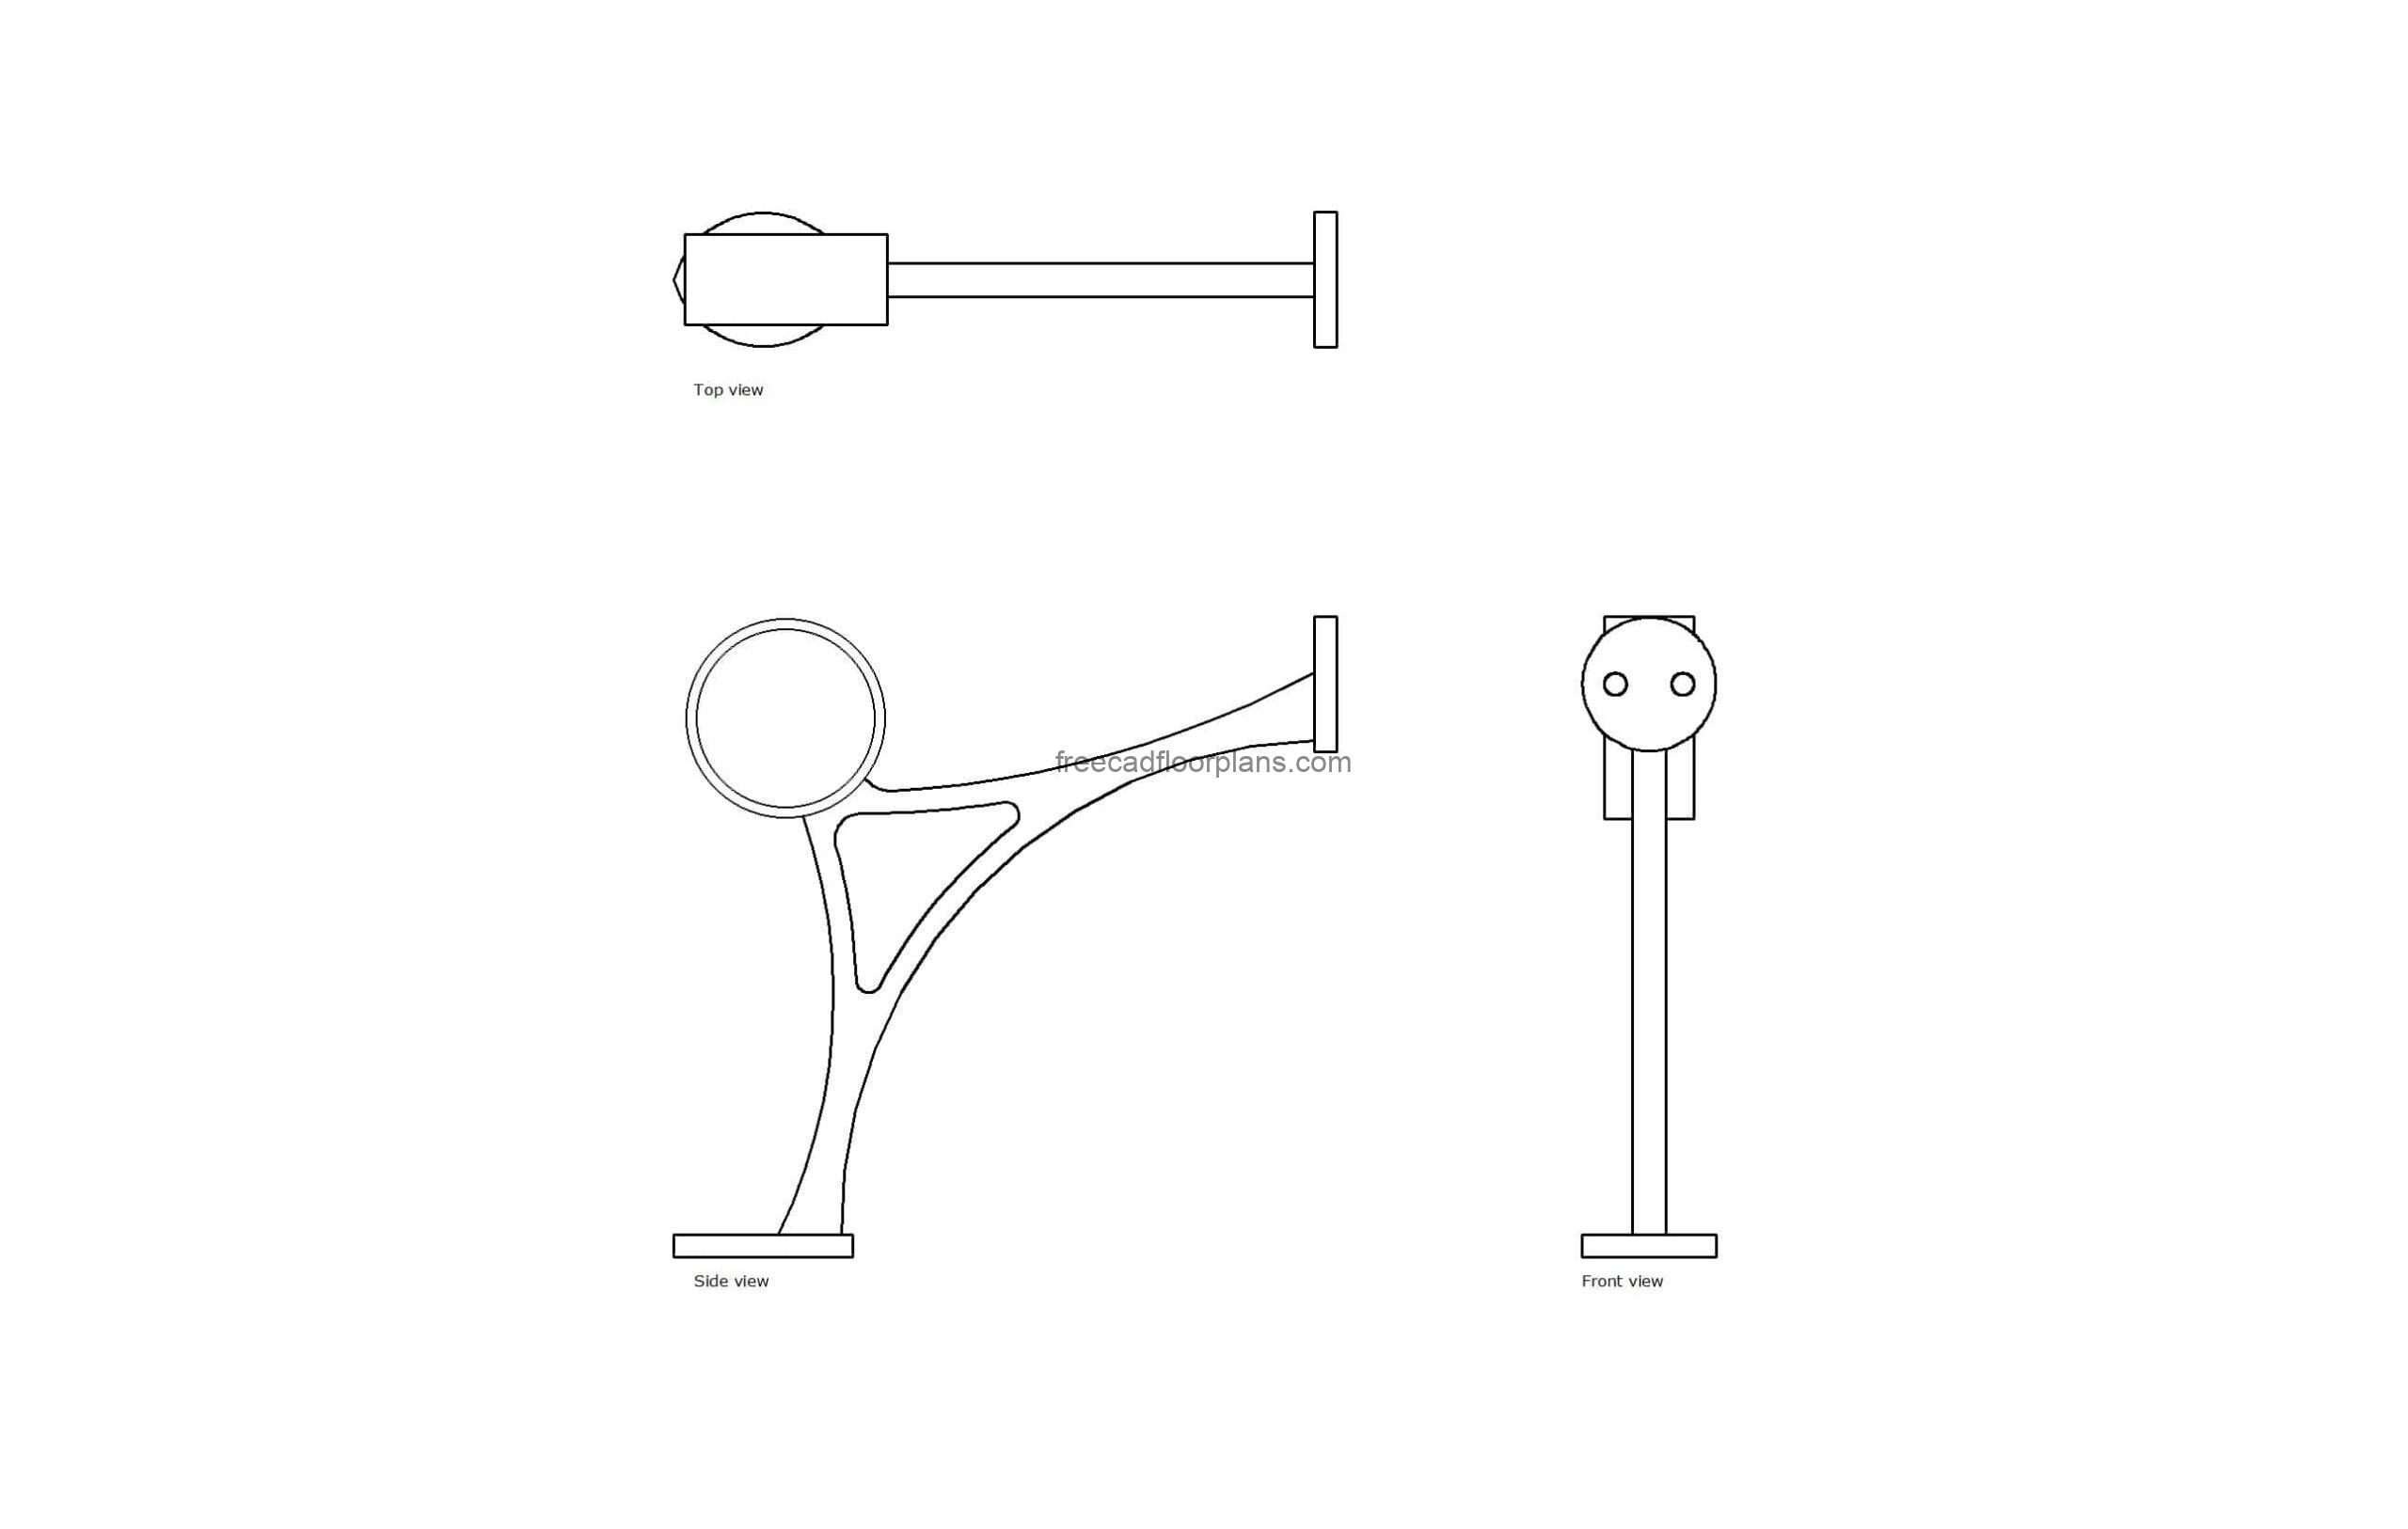 autocad drawing of a bar foot rail bracket, plan and elevation 2d views, dwg file free for download